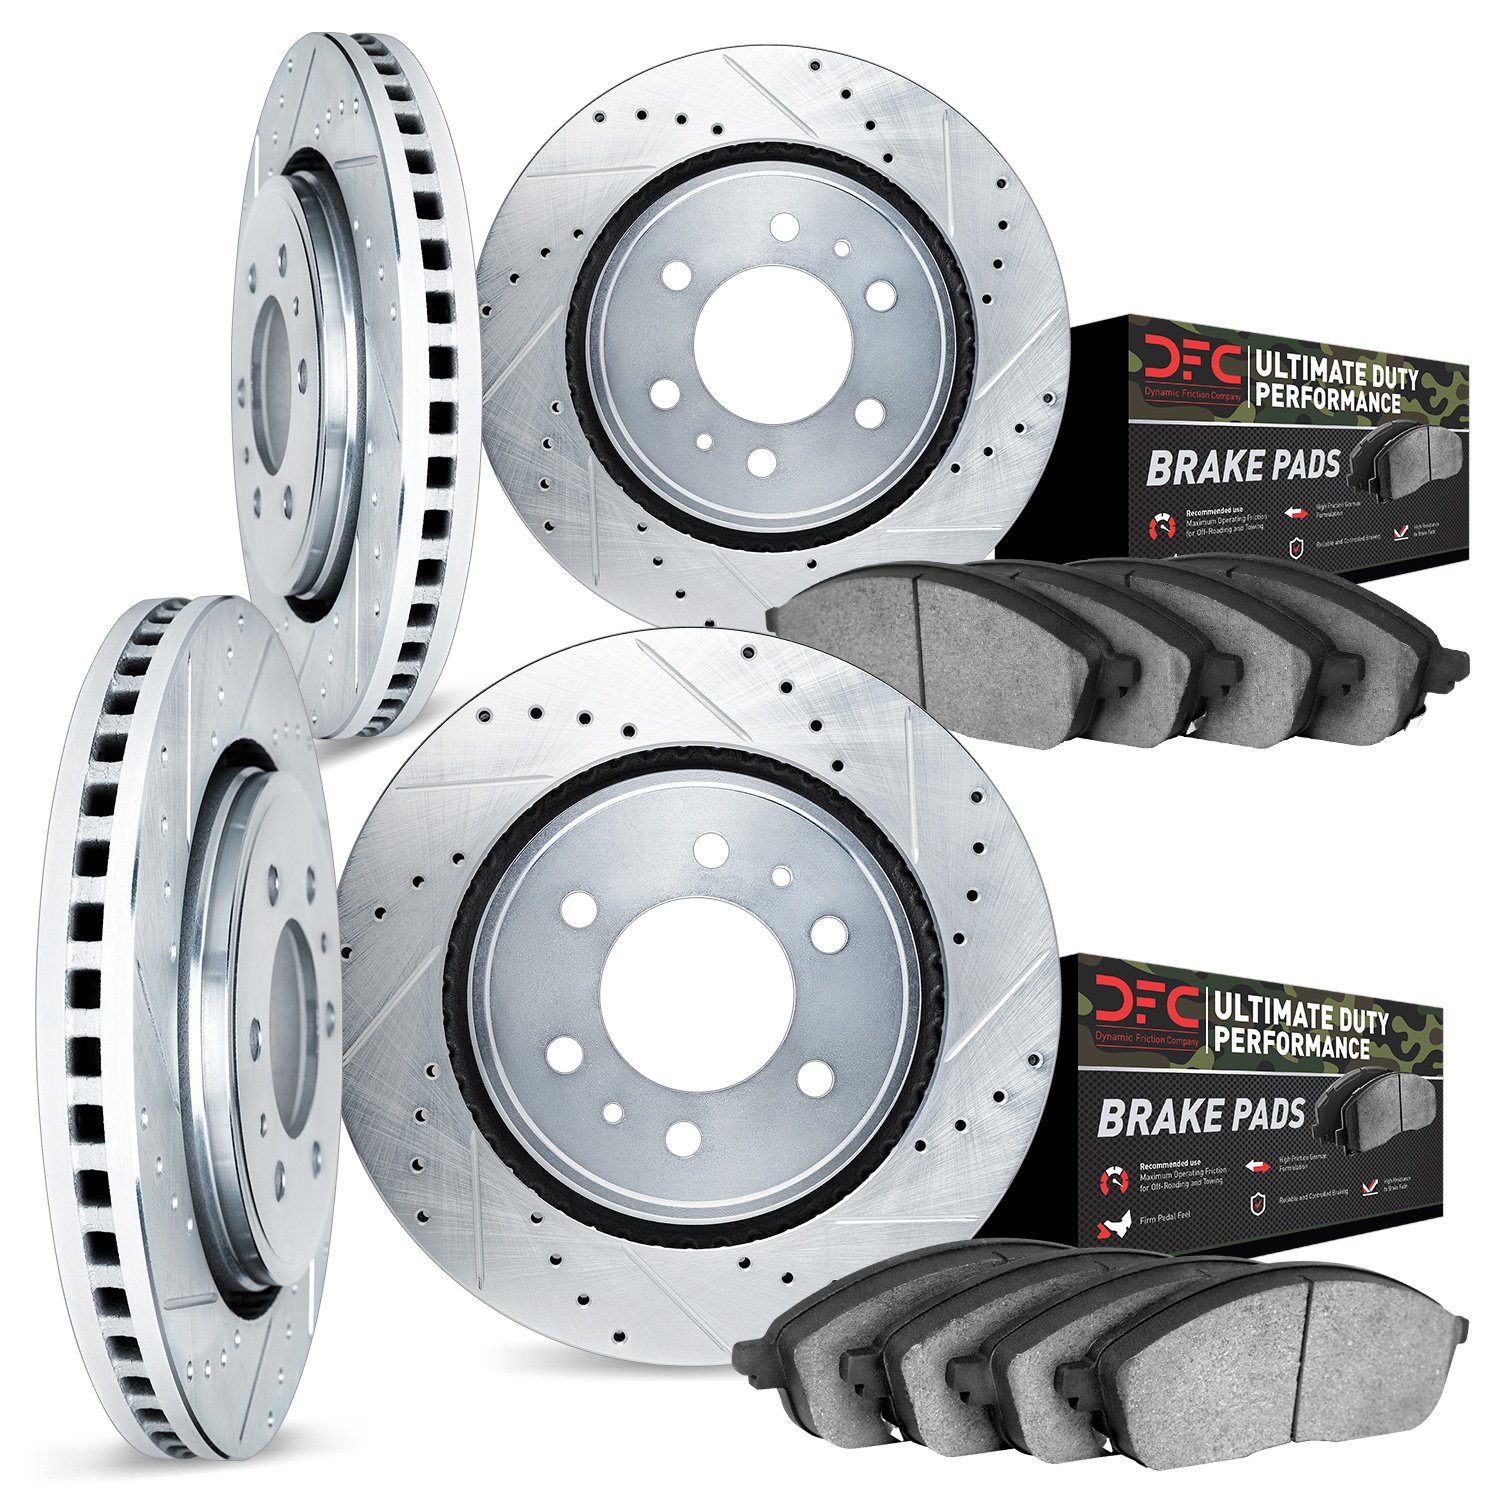 7404-40009 Drilled/Slotted Brake Rotors with Ultimate-Duty Brake Pads Kit [Silver], Fits Select Mopar, Position: Front and Rear